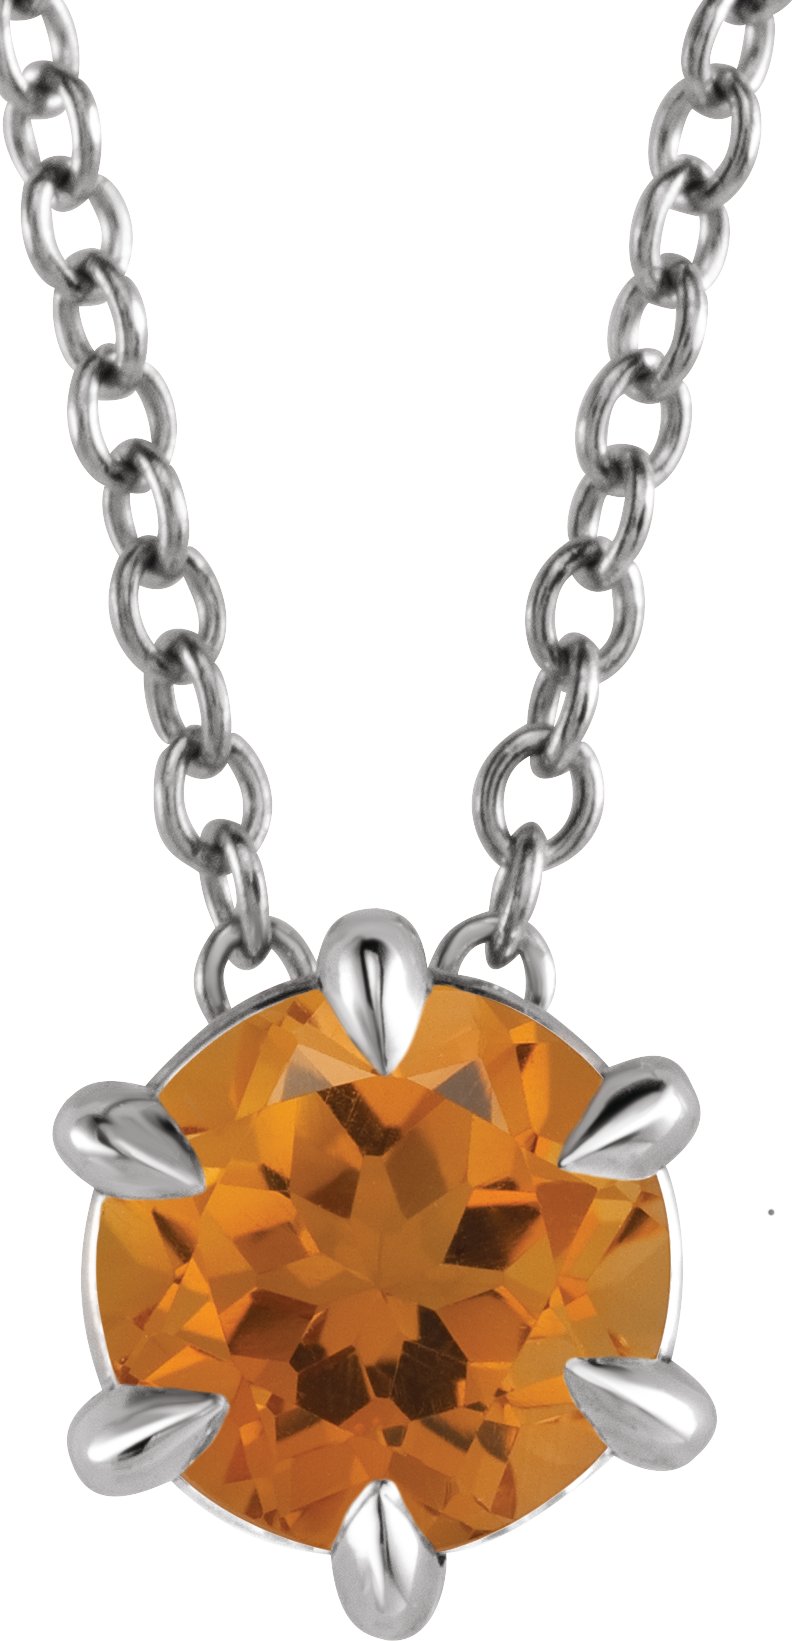 Sterling Silver 4 mm Natural Citrine Solitaire 16-18" Necklace